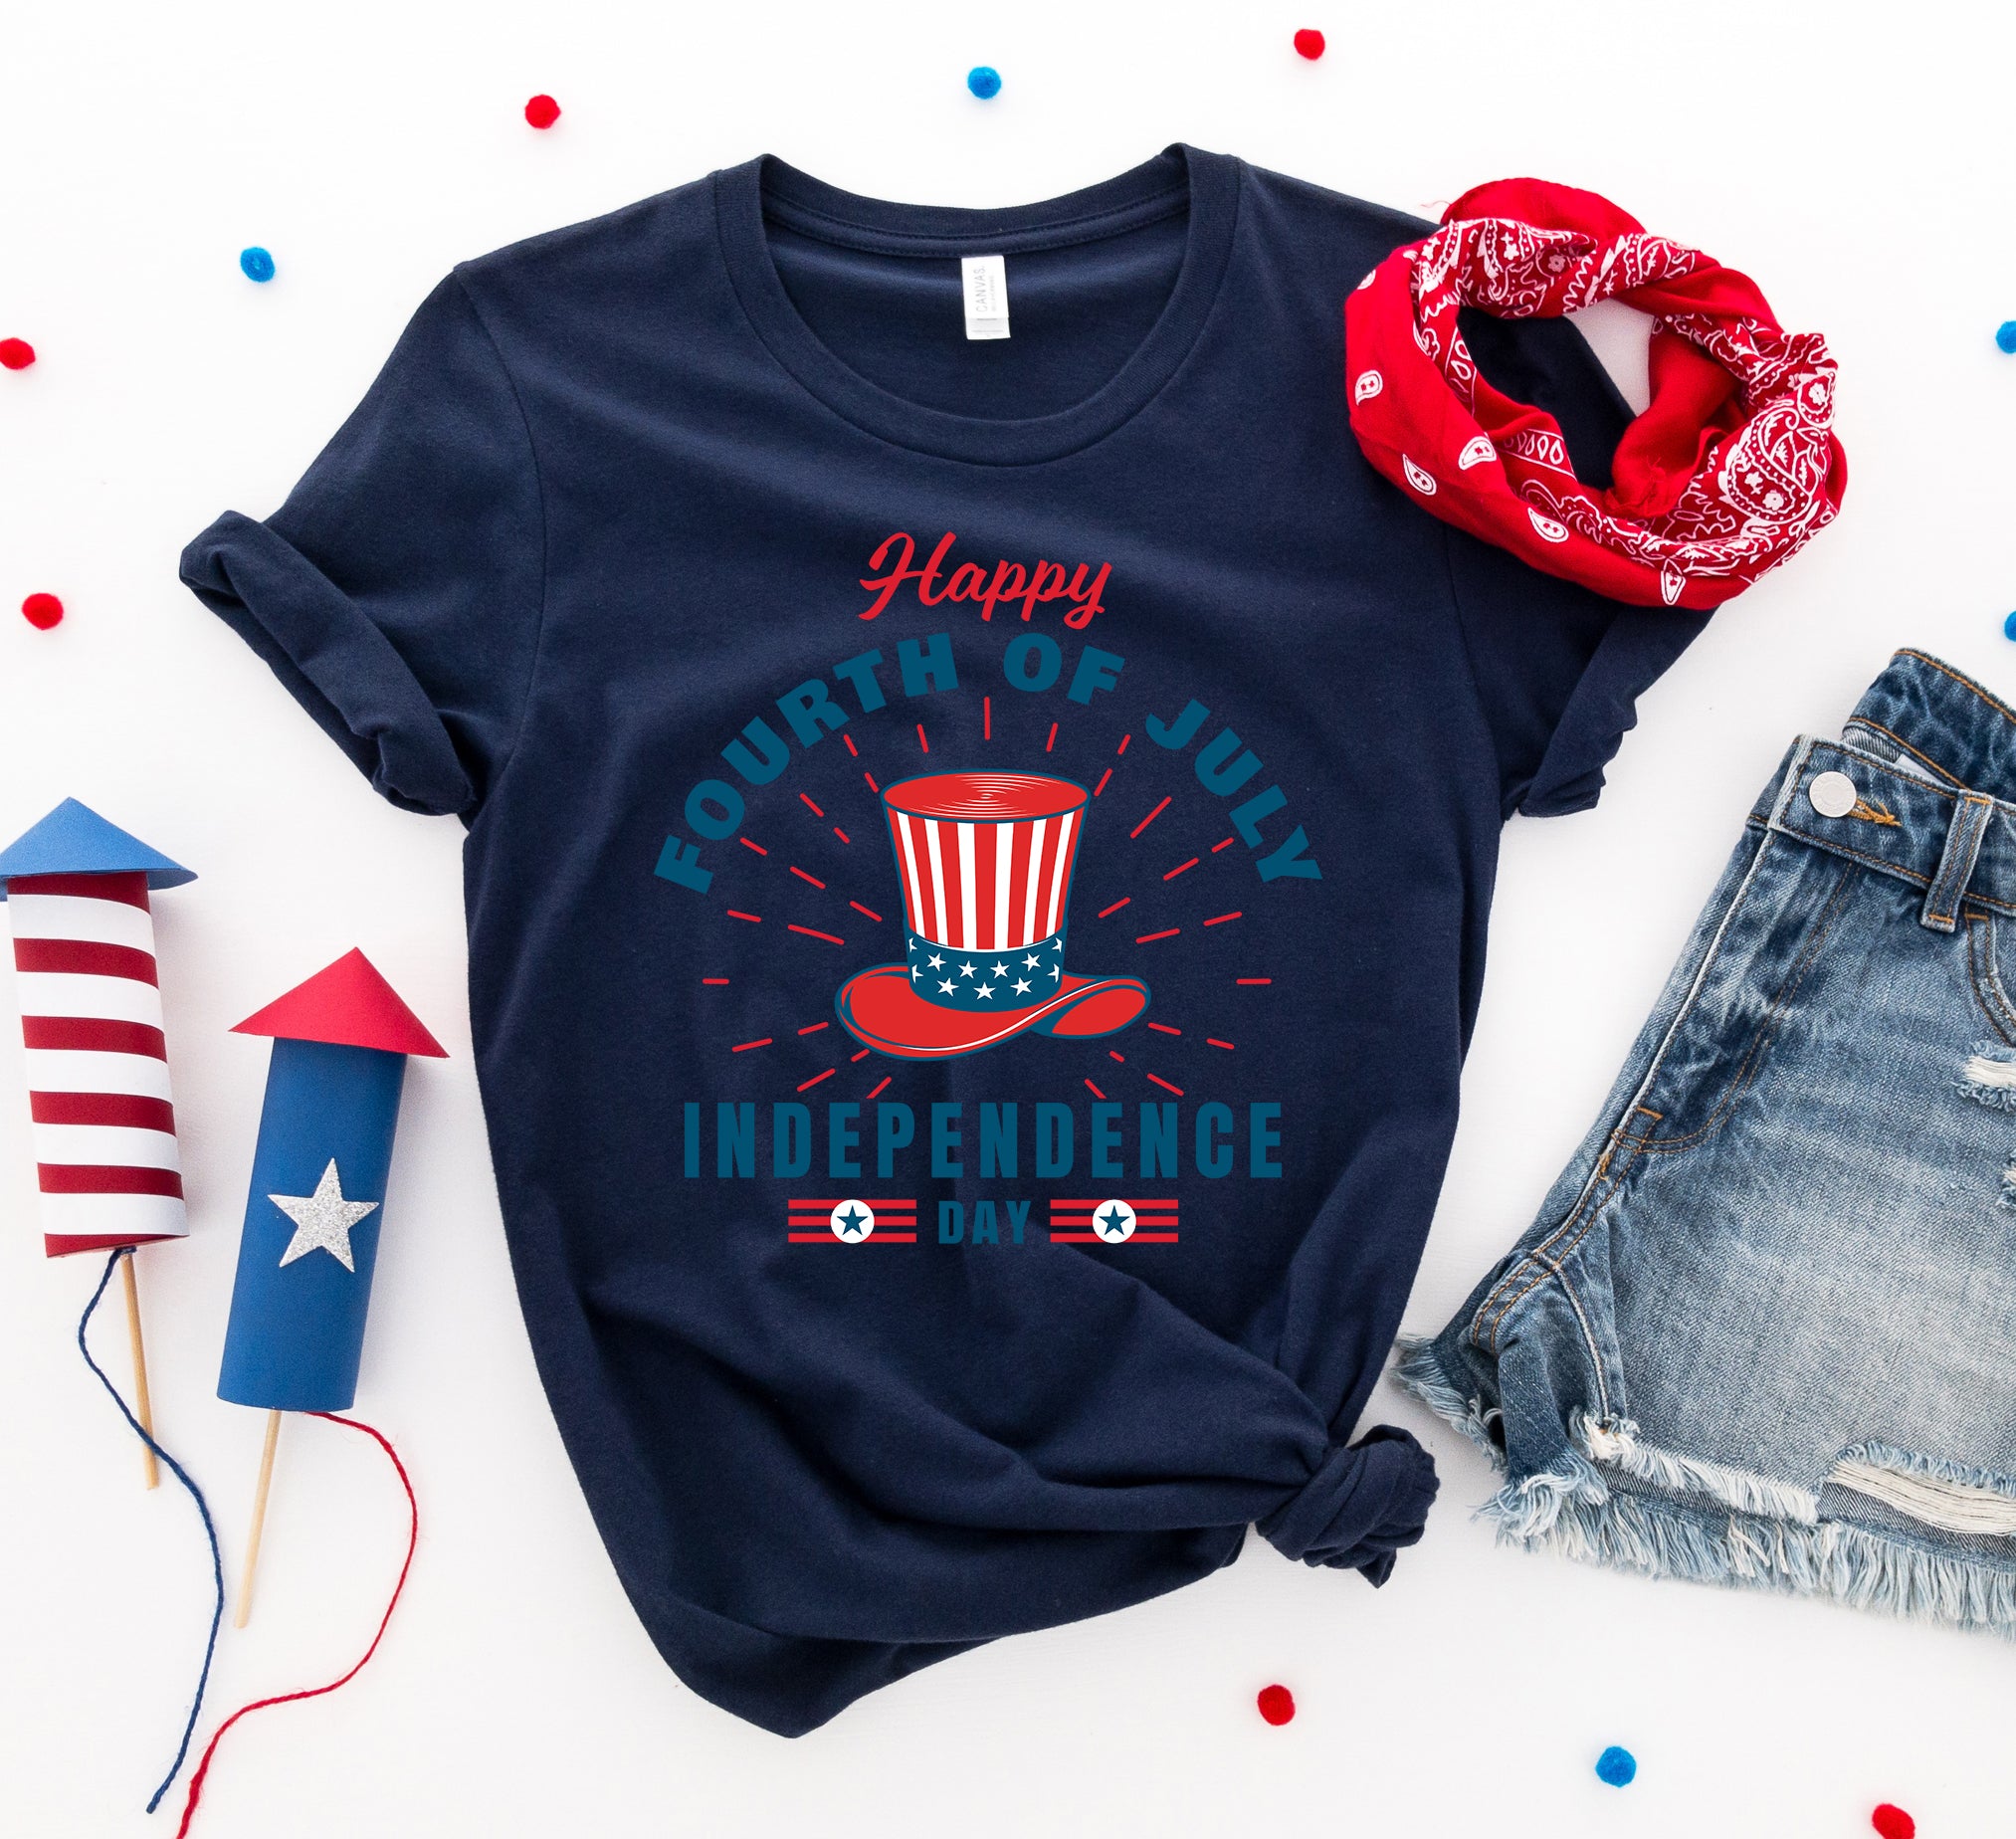 Happy Forth of July T-shirt